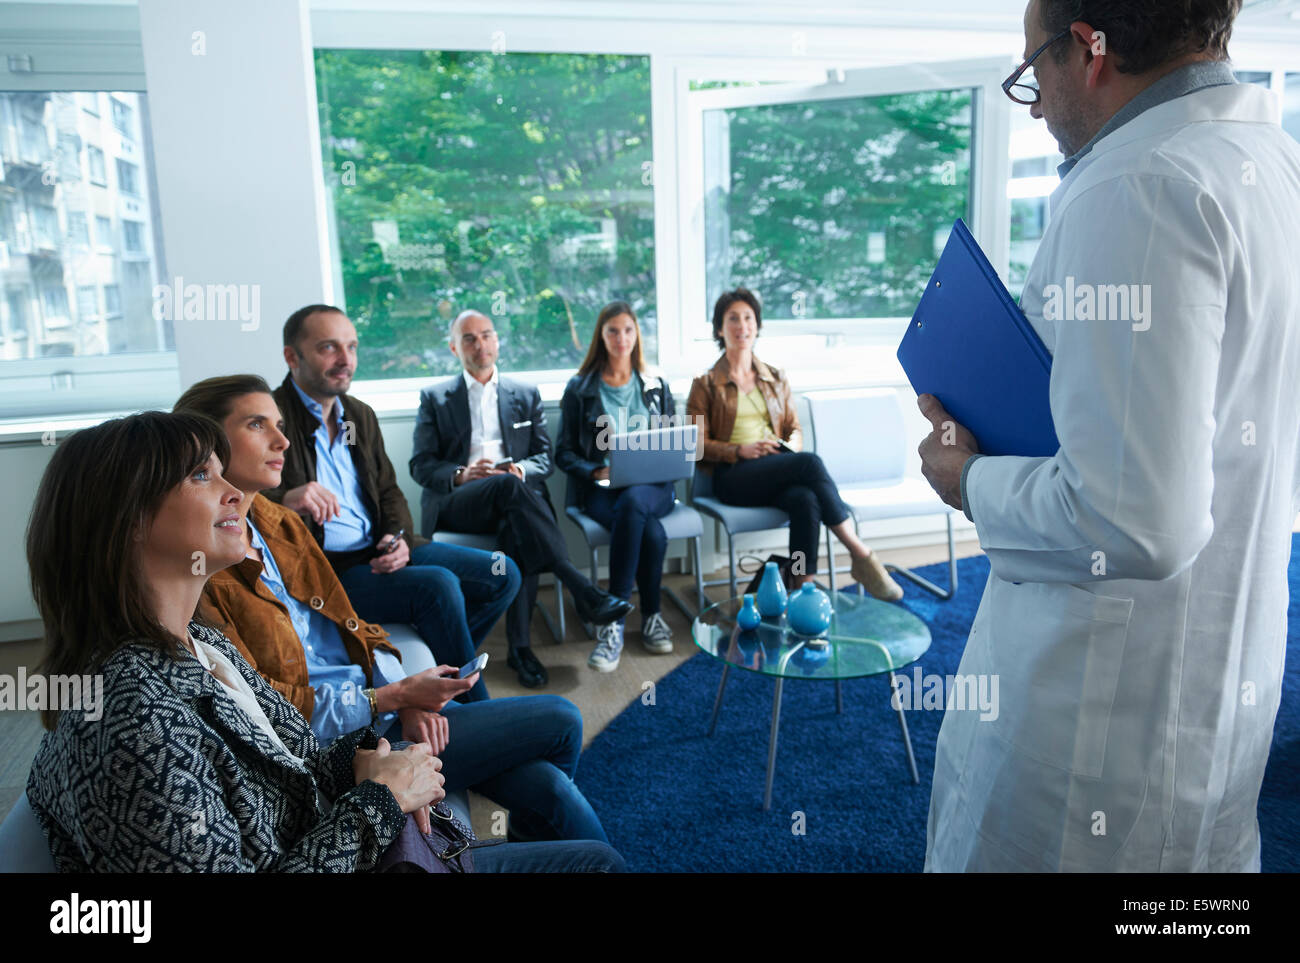 Group of people sitting, looking at man in labcoat Stock Photo